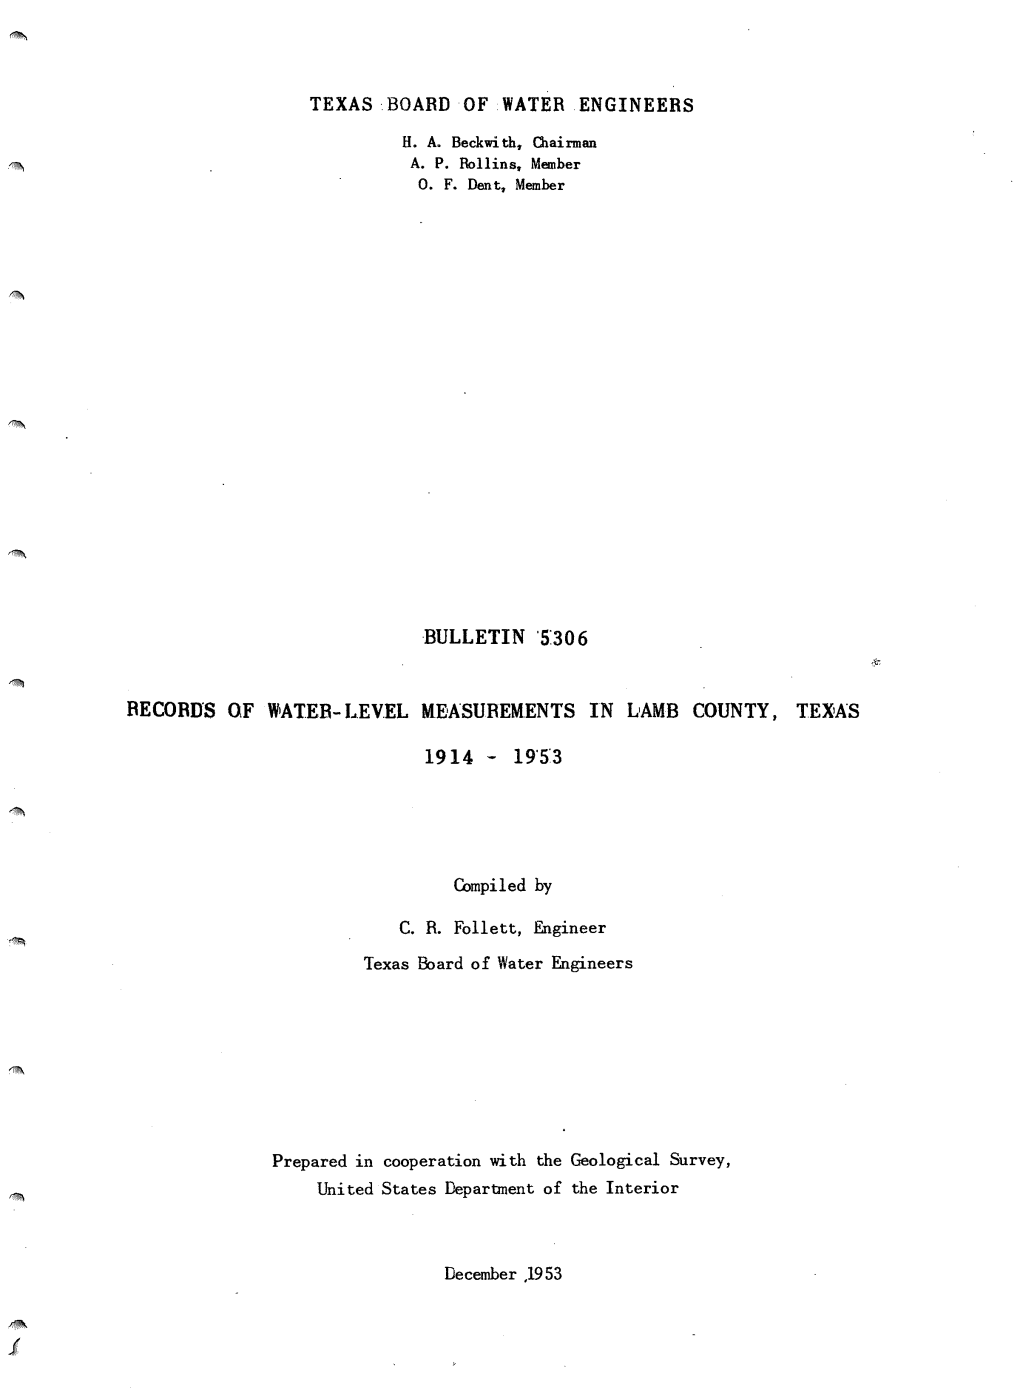 Records of Water-Level Measurements in Lamb County, Texas, 1914-1953